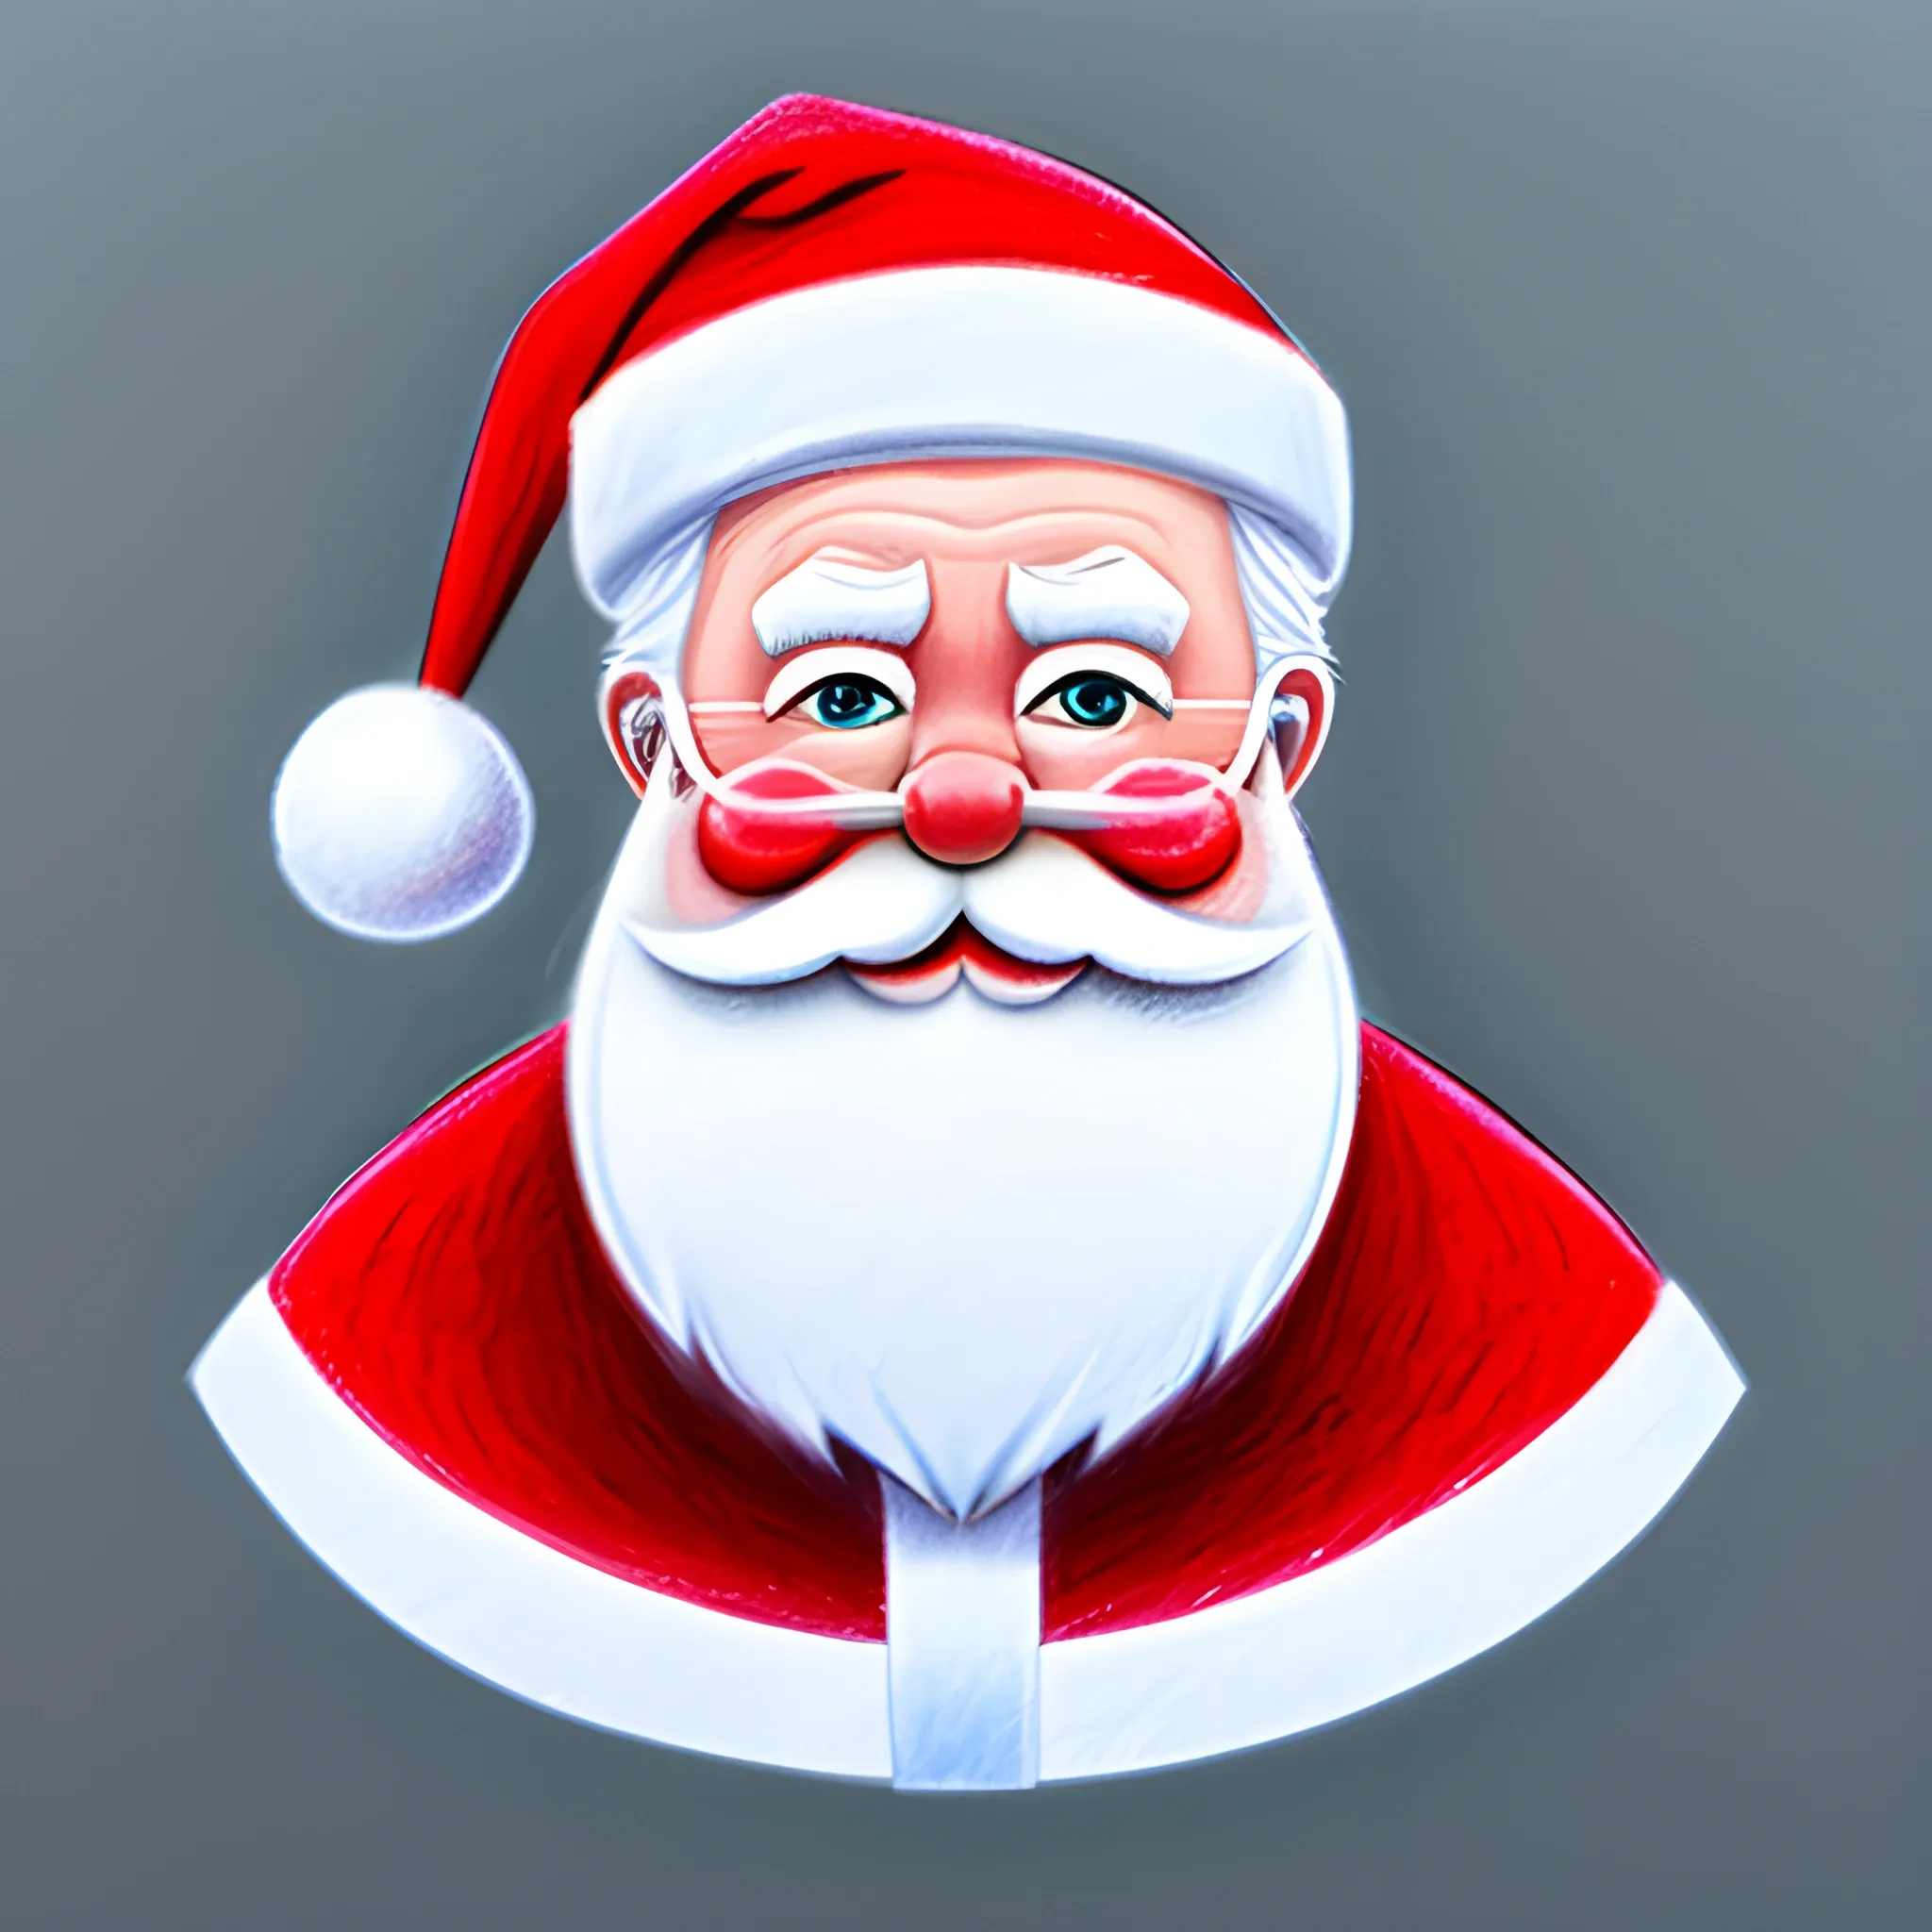 How To Draw Santa, Realistic Santa, Step by Step, Drawing Guide, by  finalprodigy - DragoArt